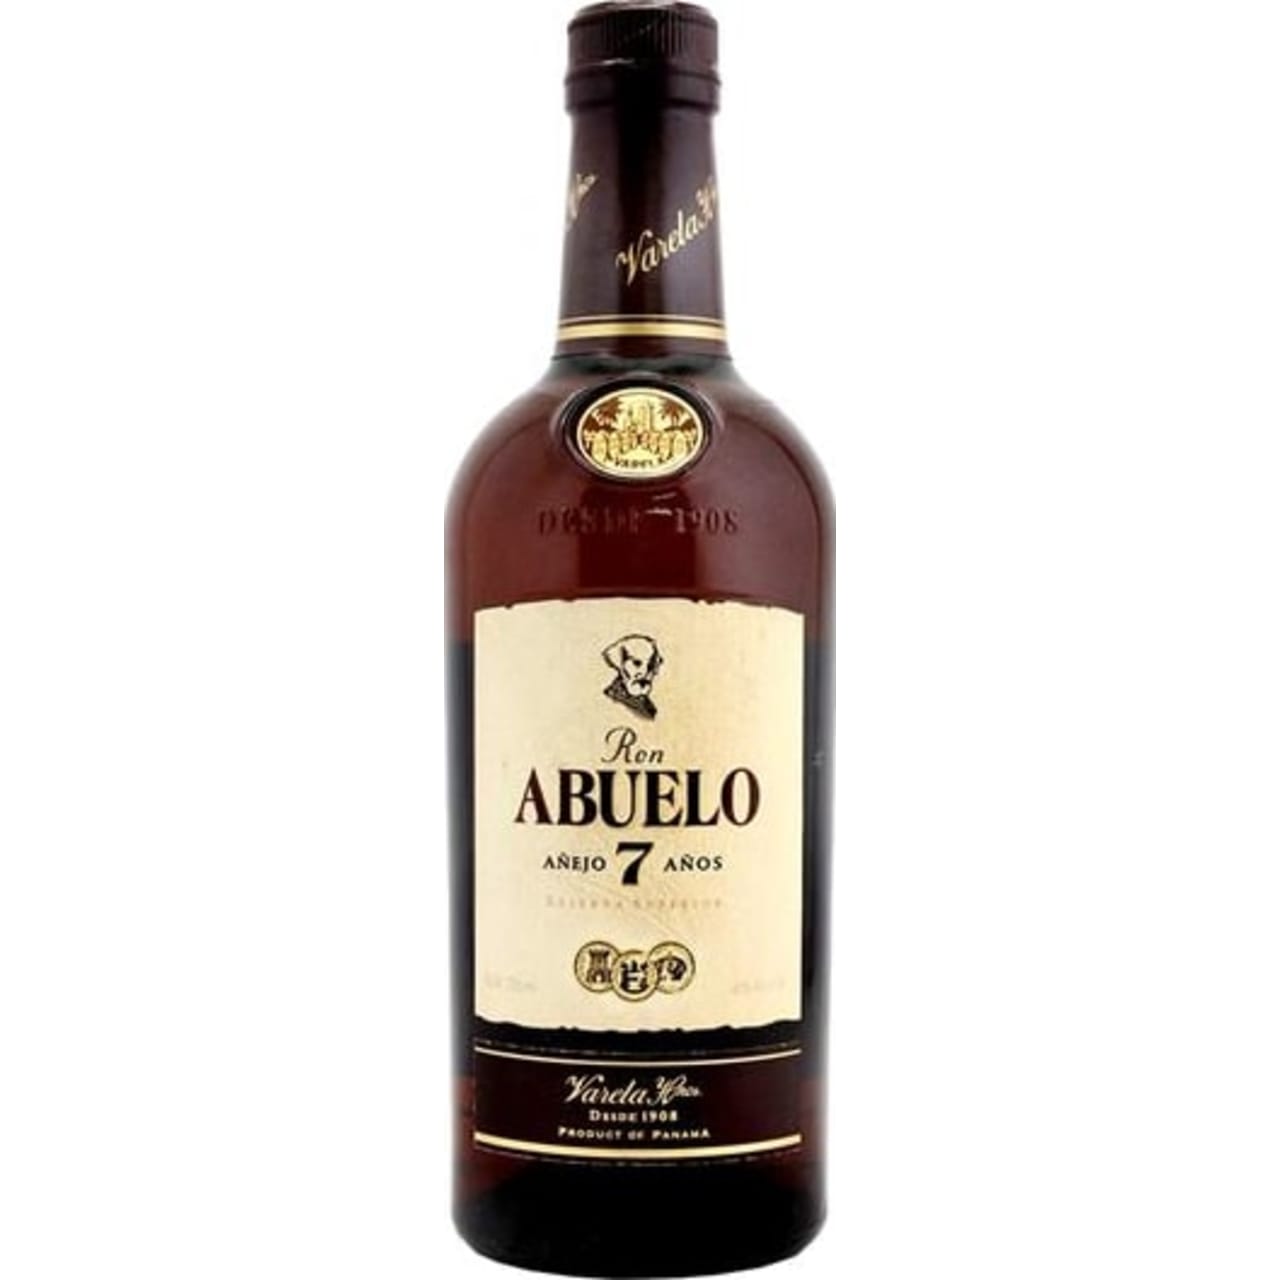 Ron Abuelo Añejo 7 years old rum is the result of passion for producing the best rum. It's produced from the fermentation of cane molasses, aged for 7 years in small white oak barrels, carefully selected for this product.